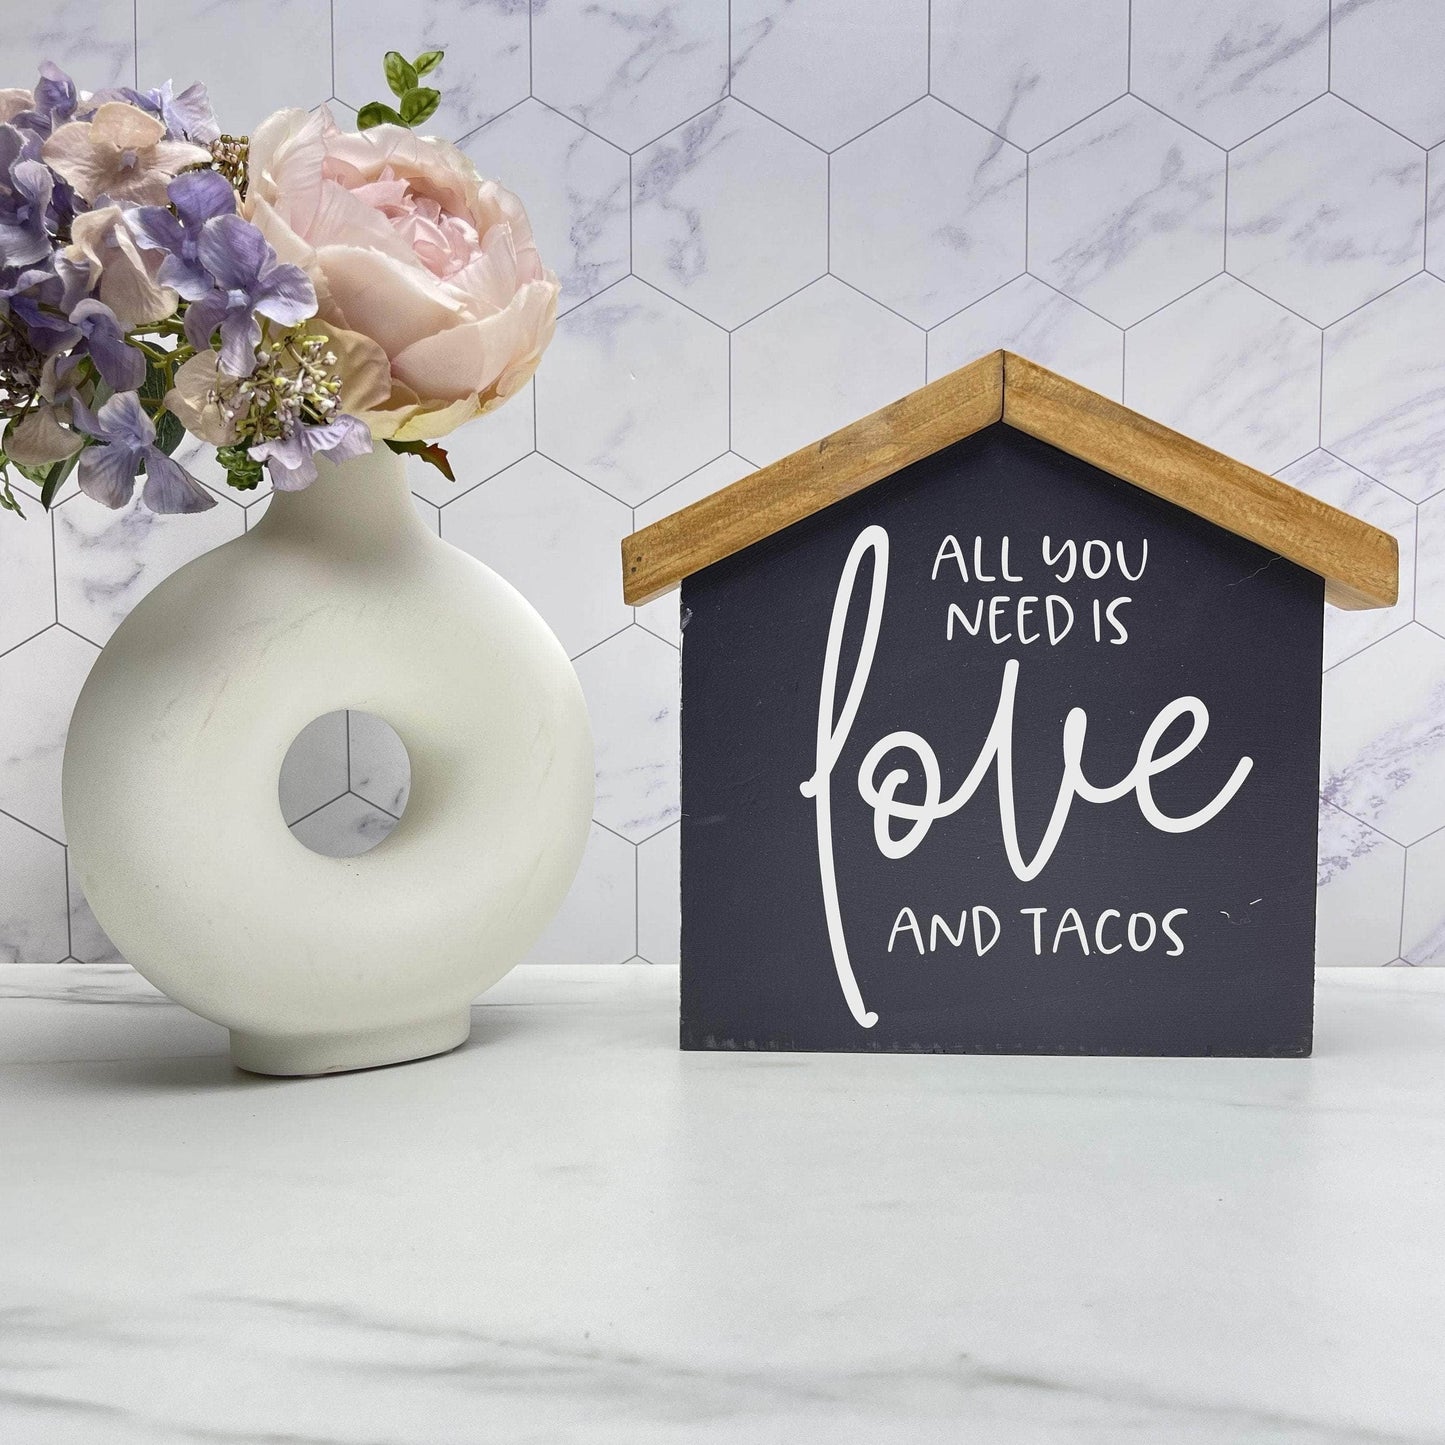 All you need is love and tacos Kitchen house wood sign decor